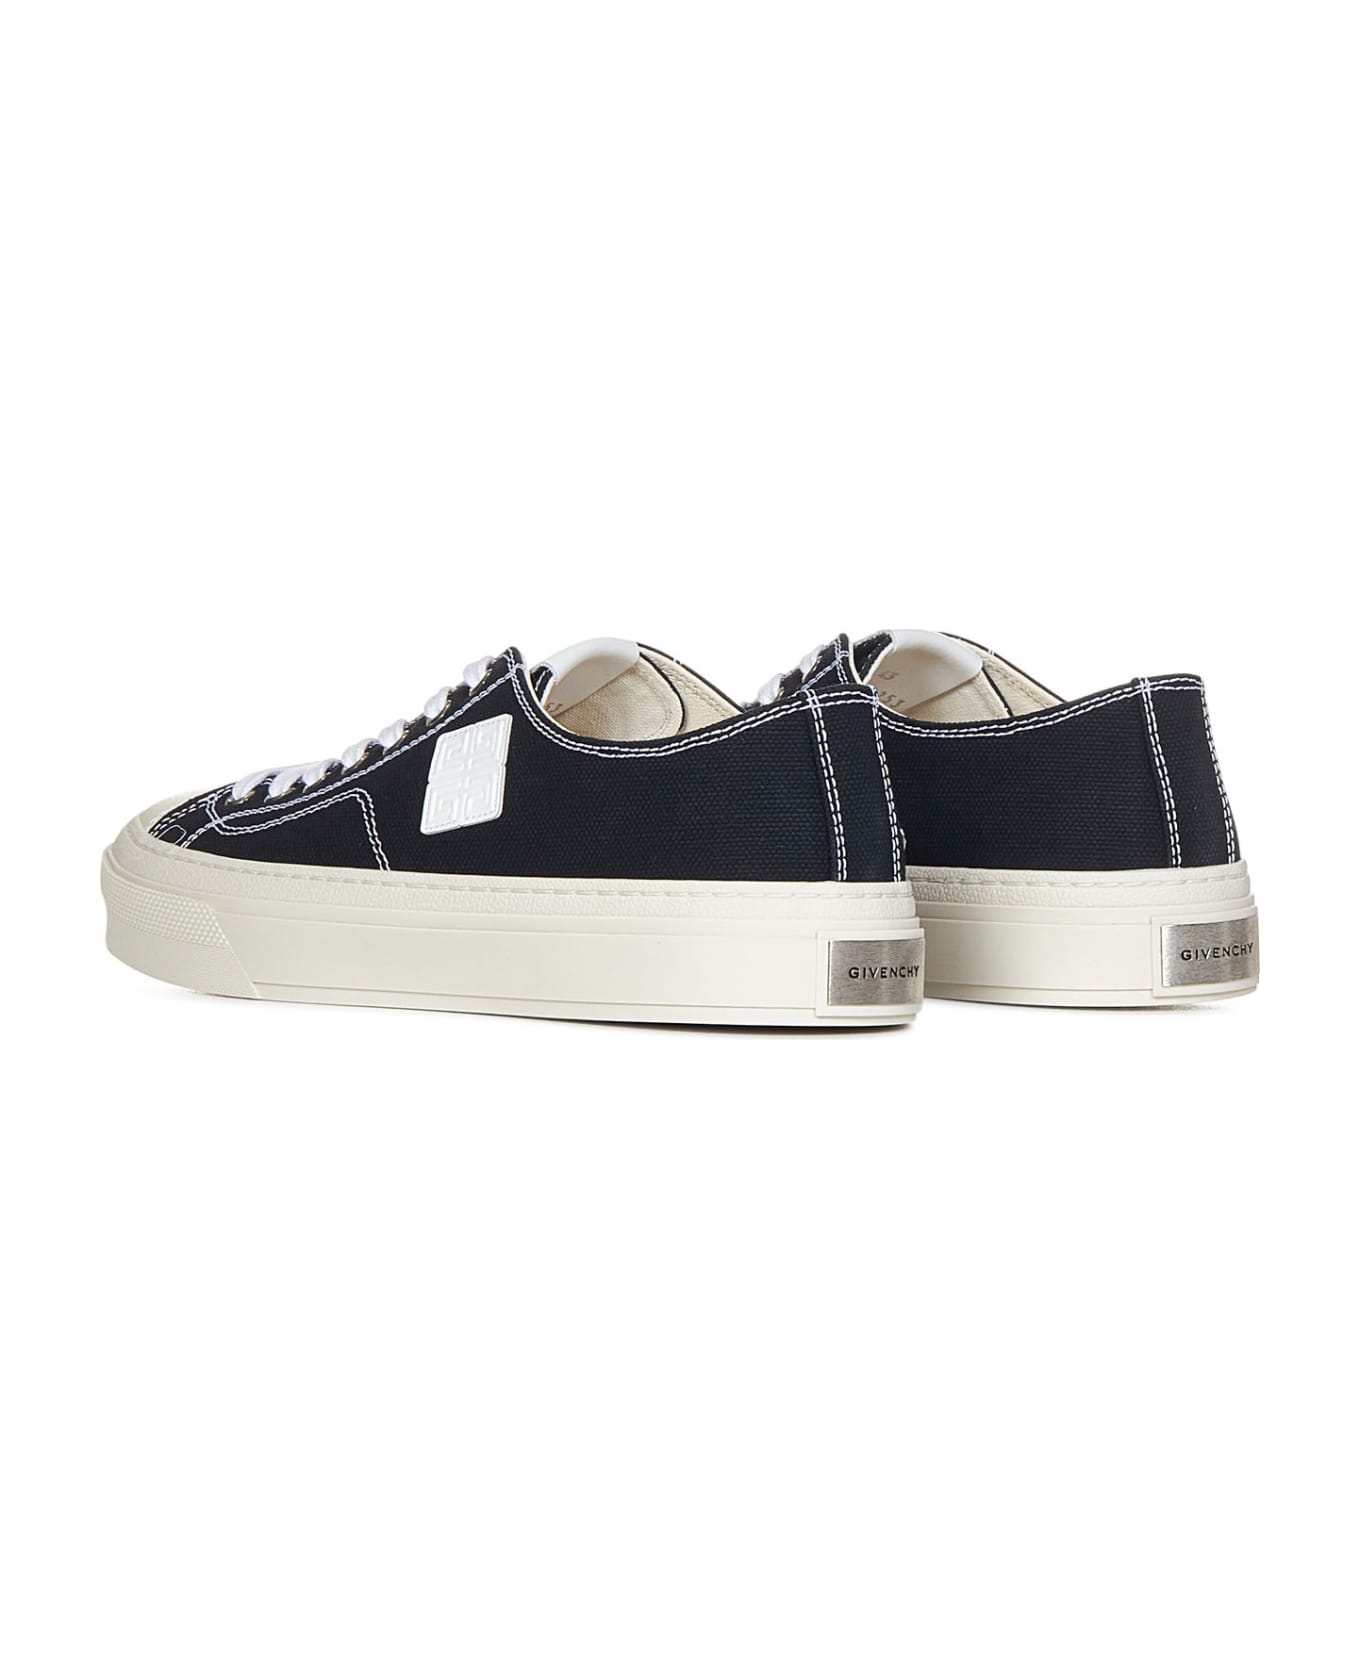 Givenchy City Sneakers - Black